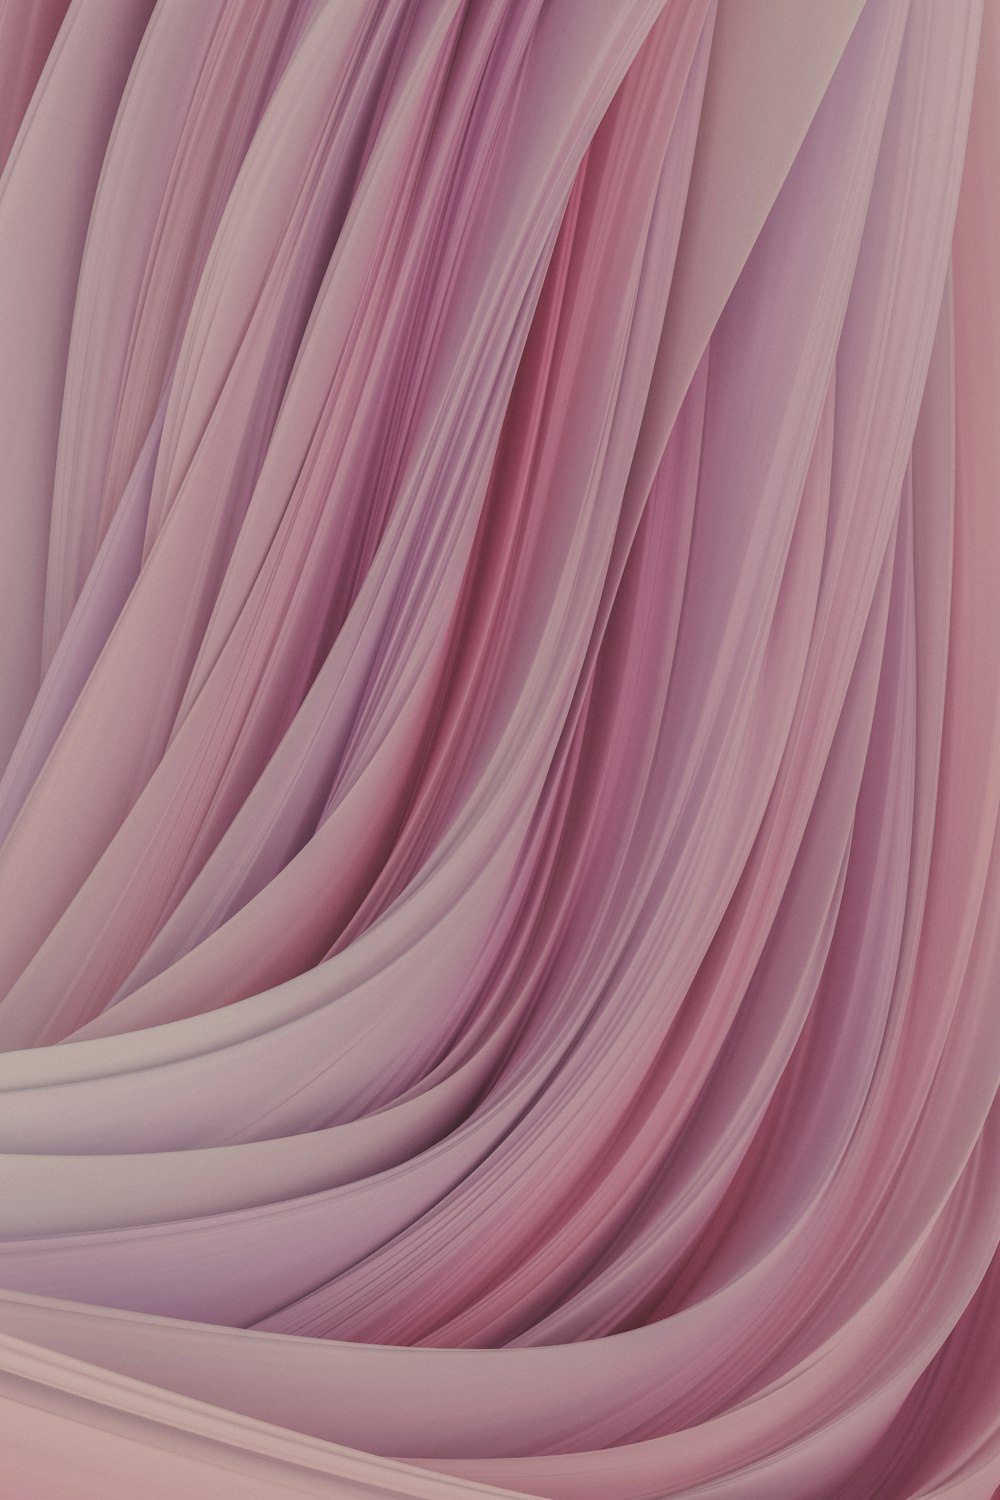 a close up of a pink curtain